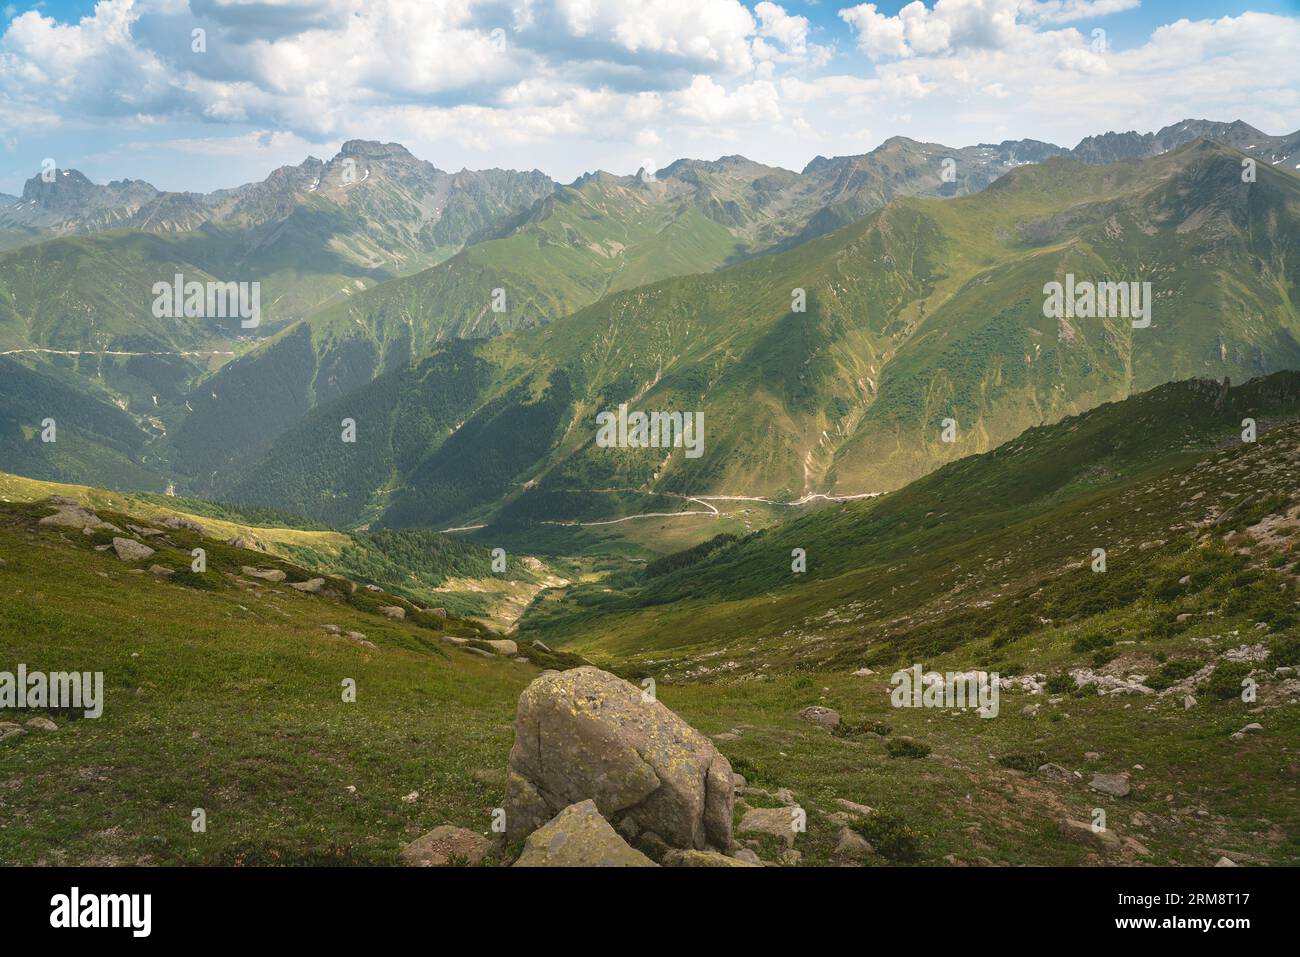 Kavrun valley and Kavrun plateau in the Black Sea region of Turkey Stock Photo